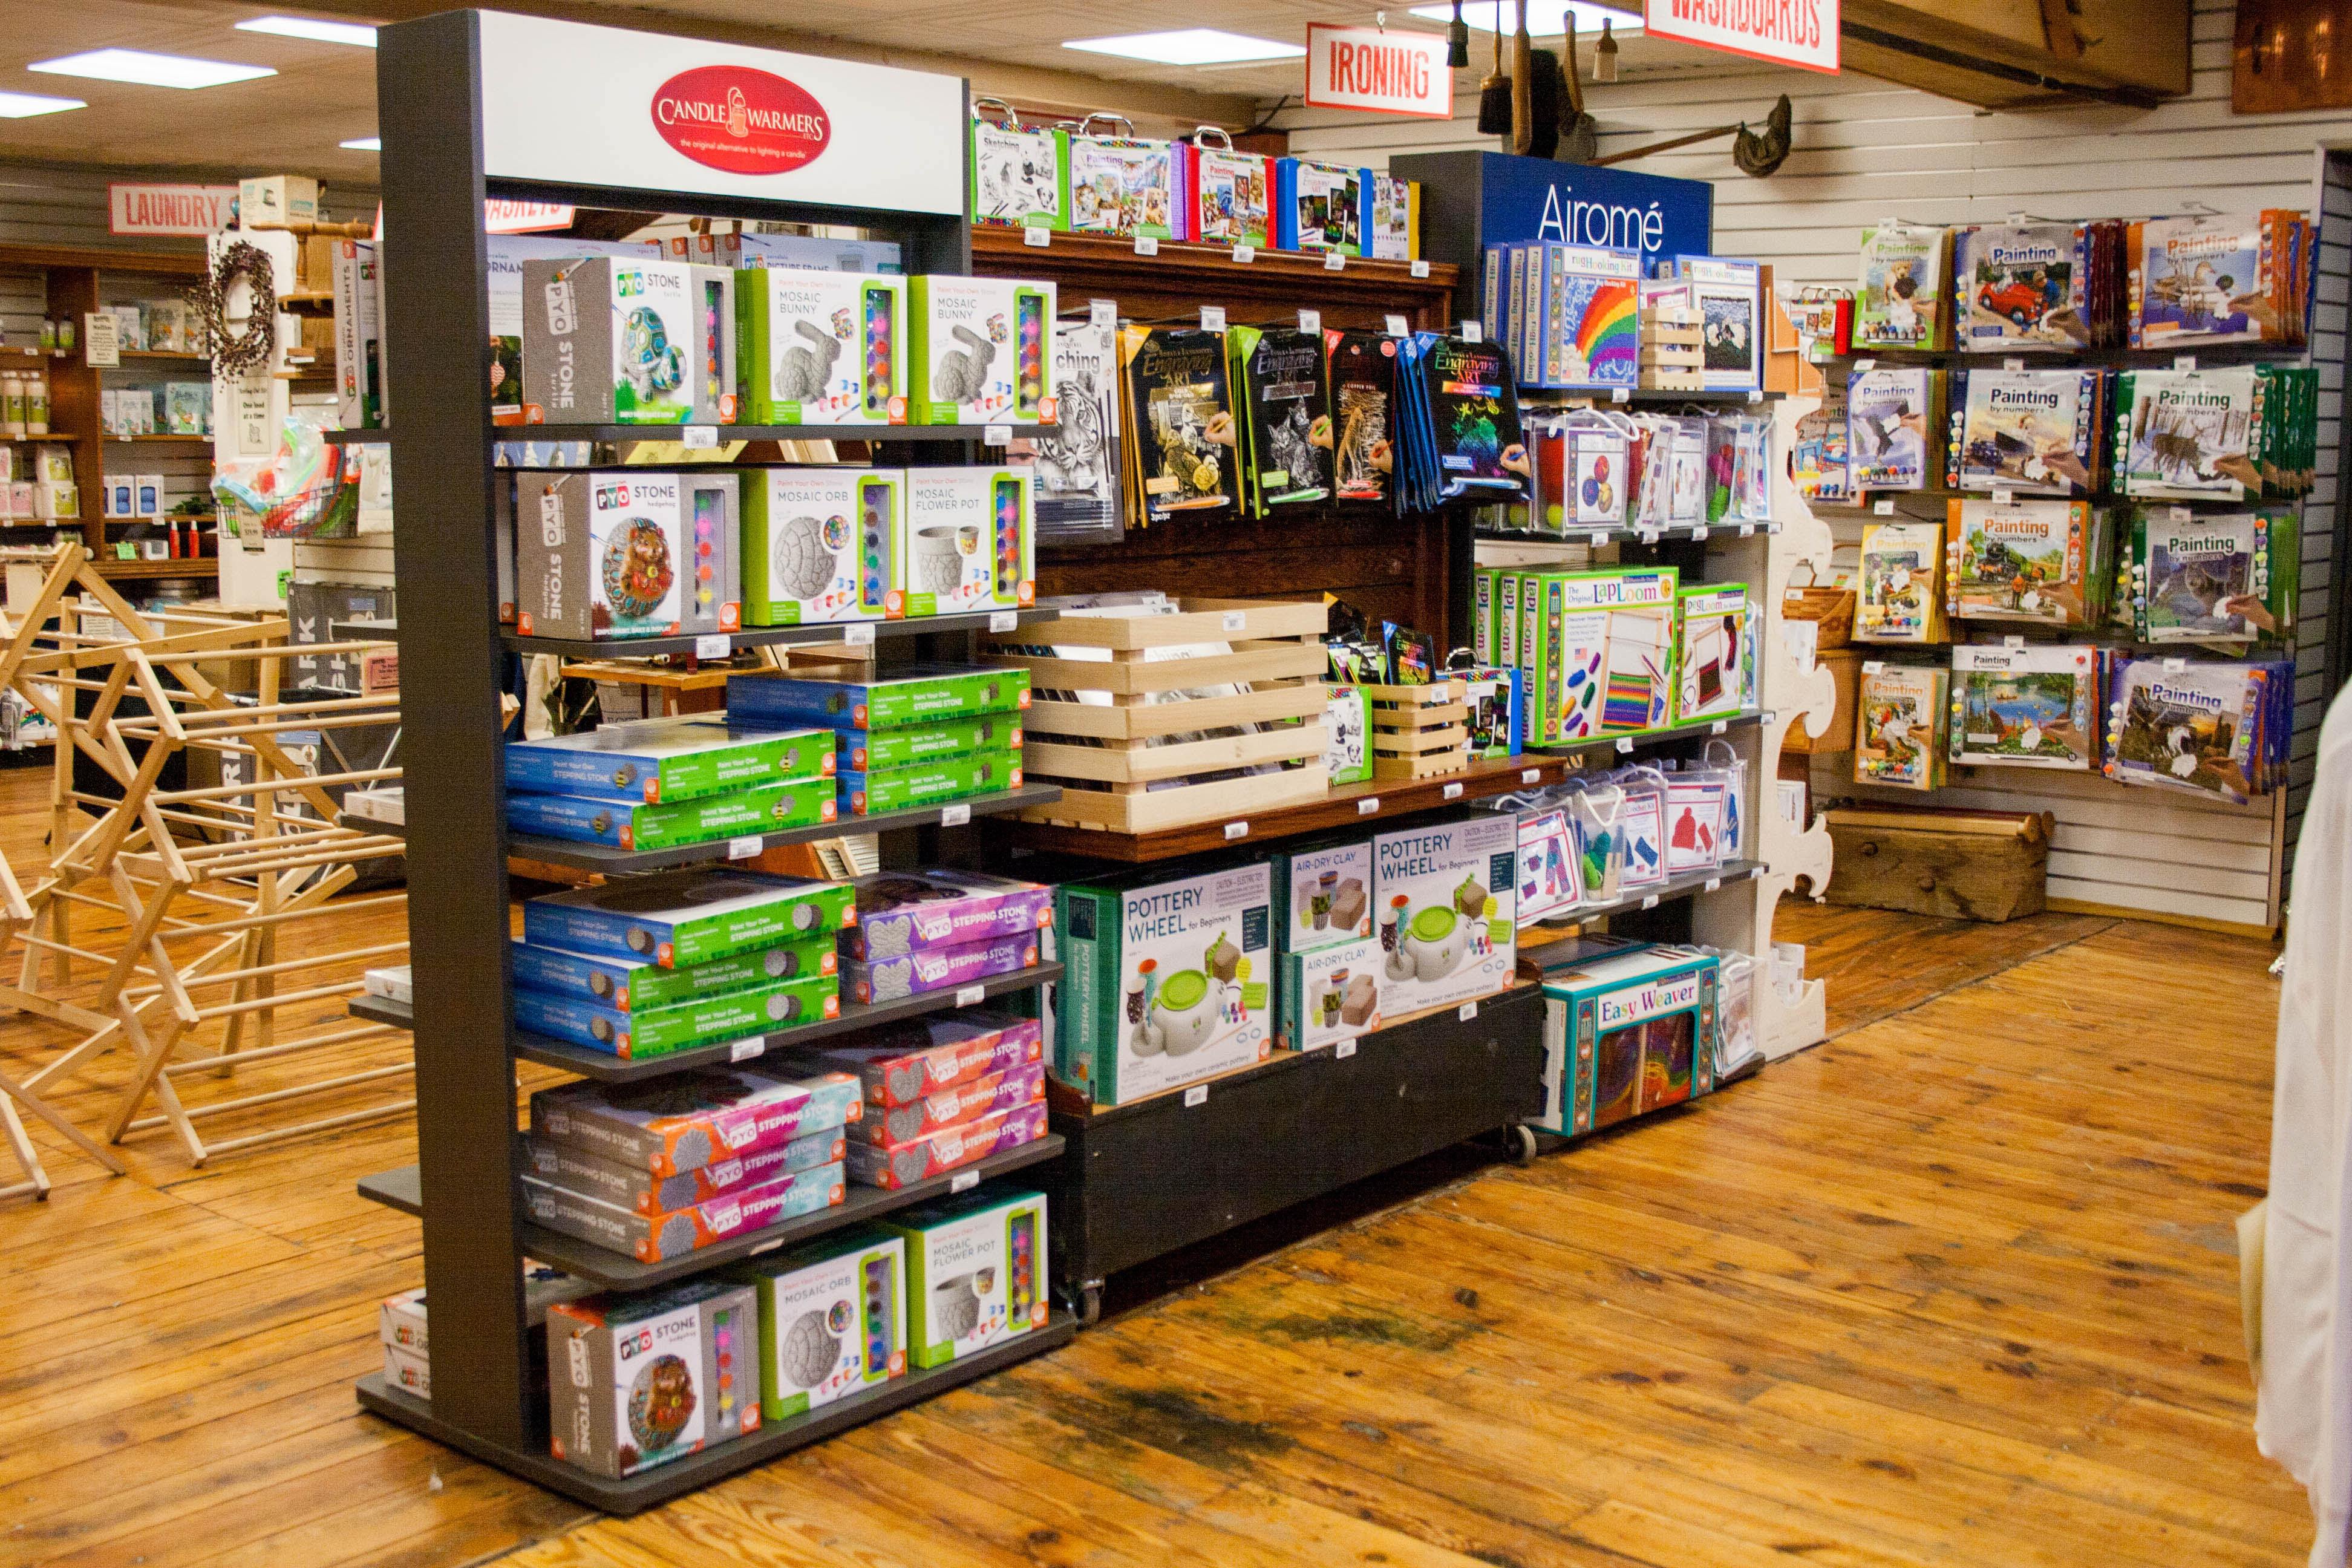 From painting to pottery to puzzles, there is something for everyone in our new craft bay